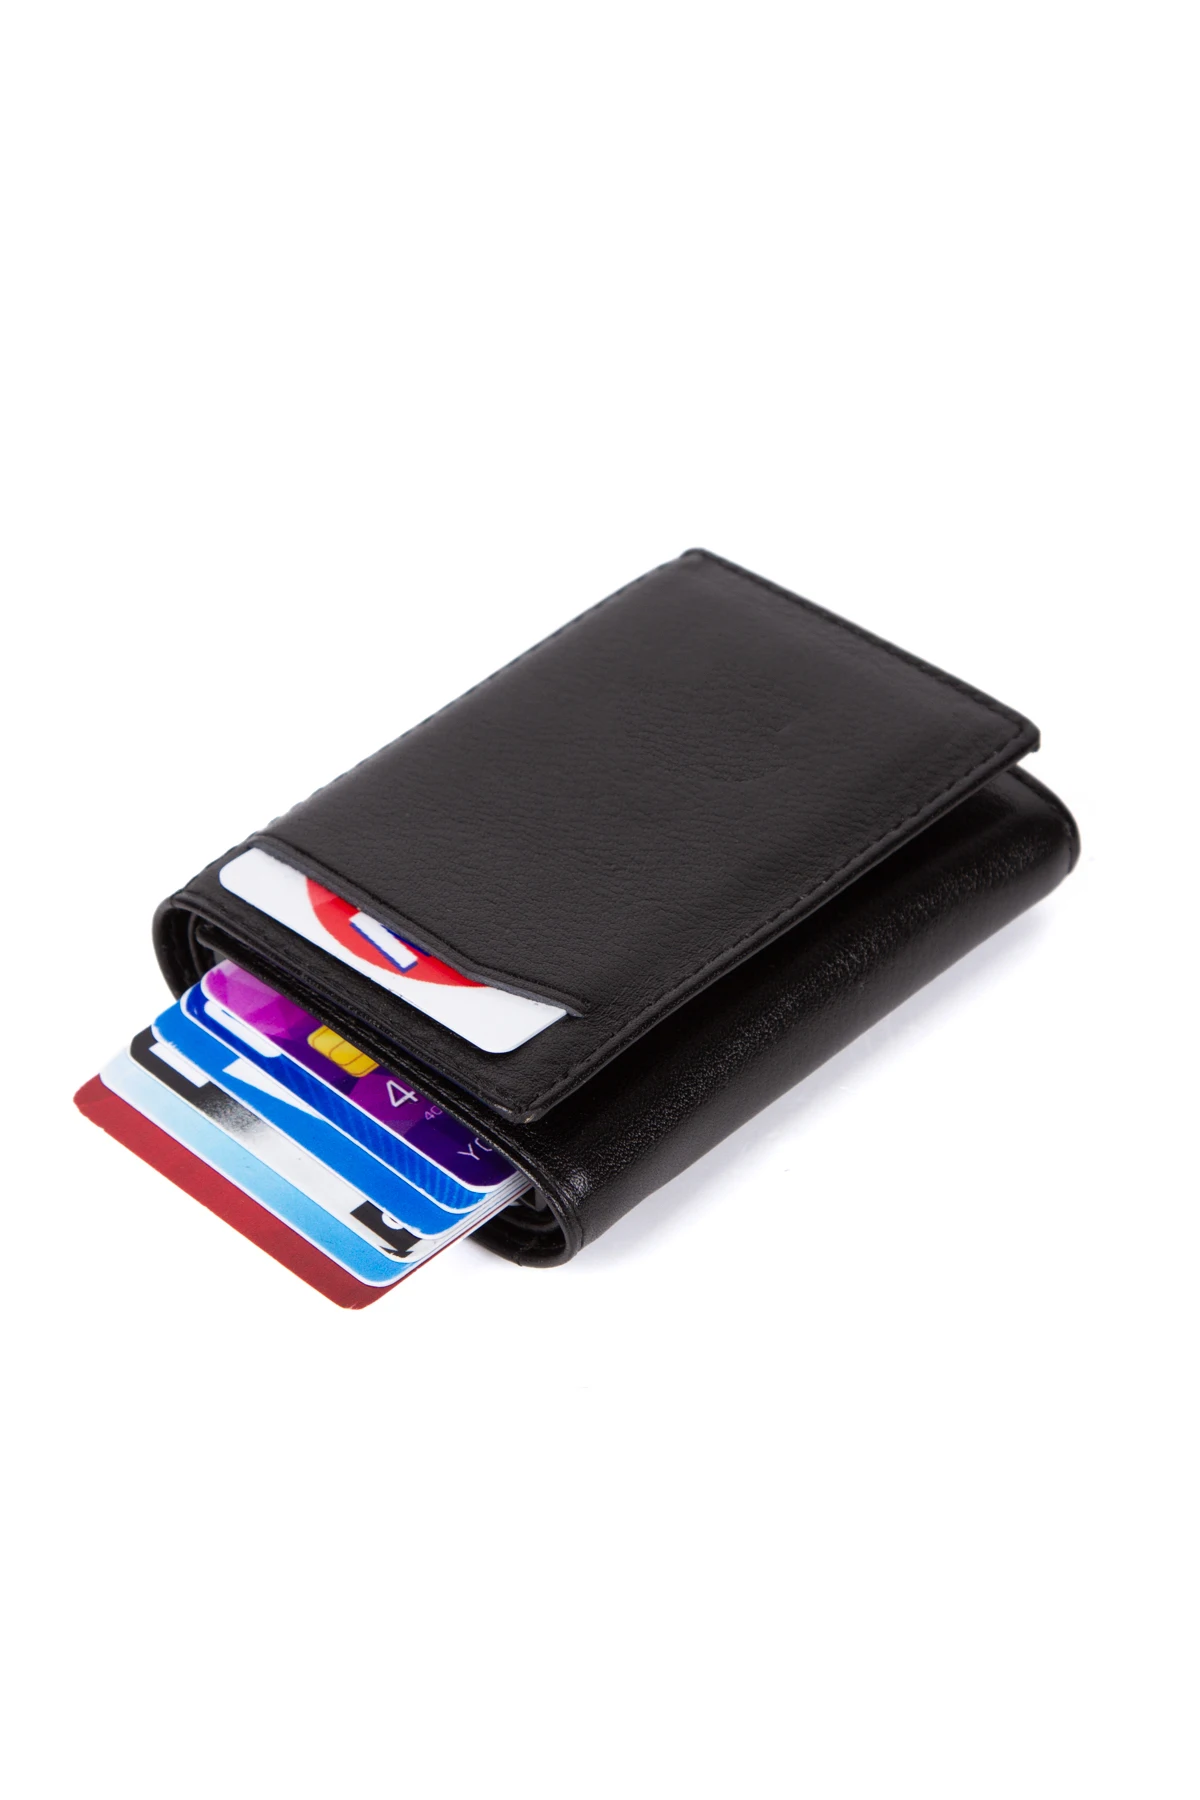 Genuine Leather Automatic Card Case Holder Money Clip Pop Up Wallet Storage From Turkey